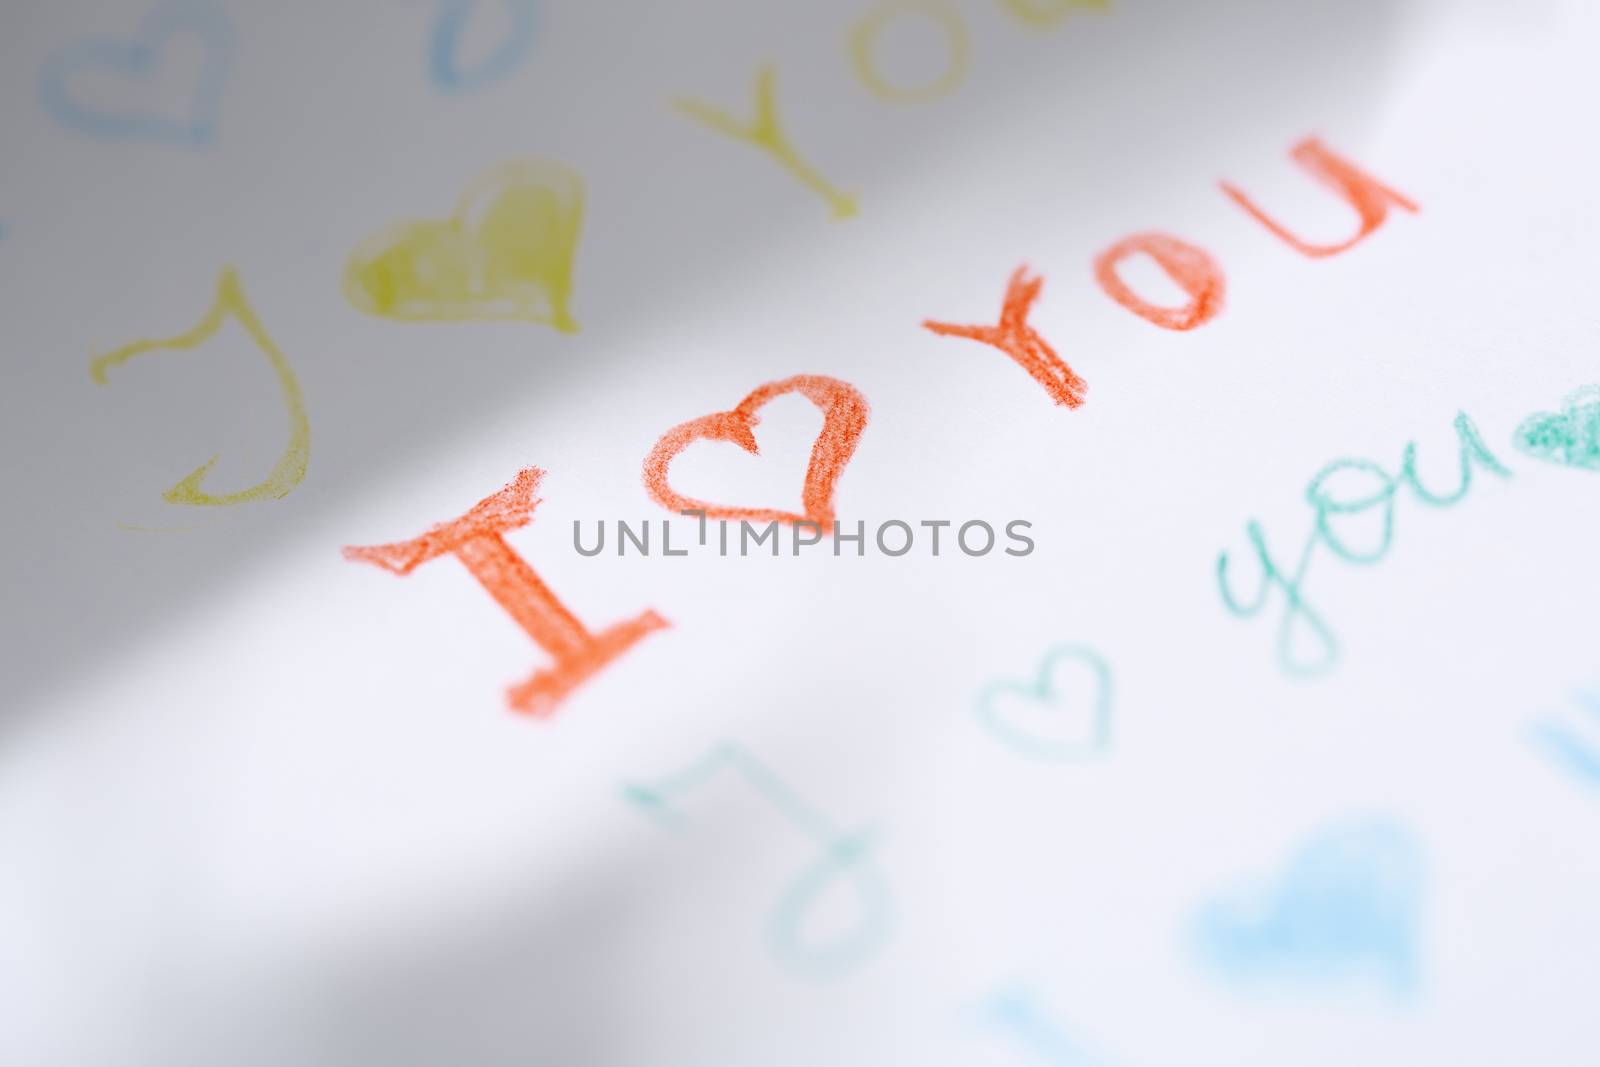 Paper with love you message. Close-up view